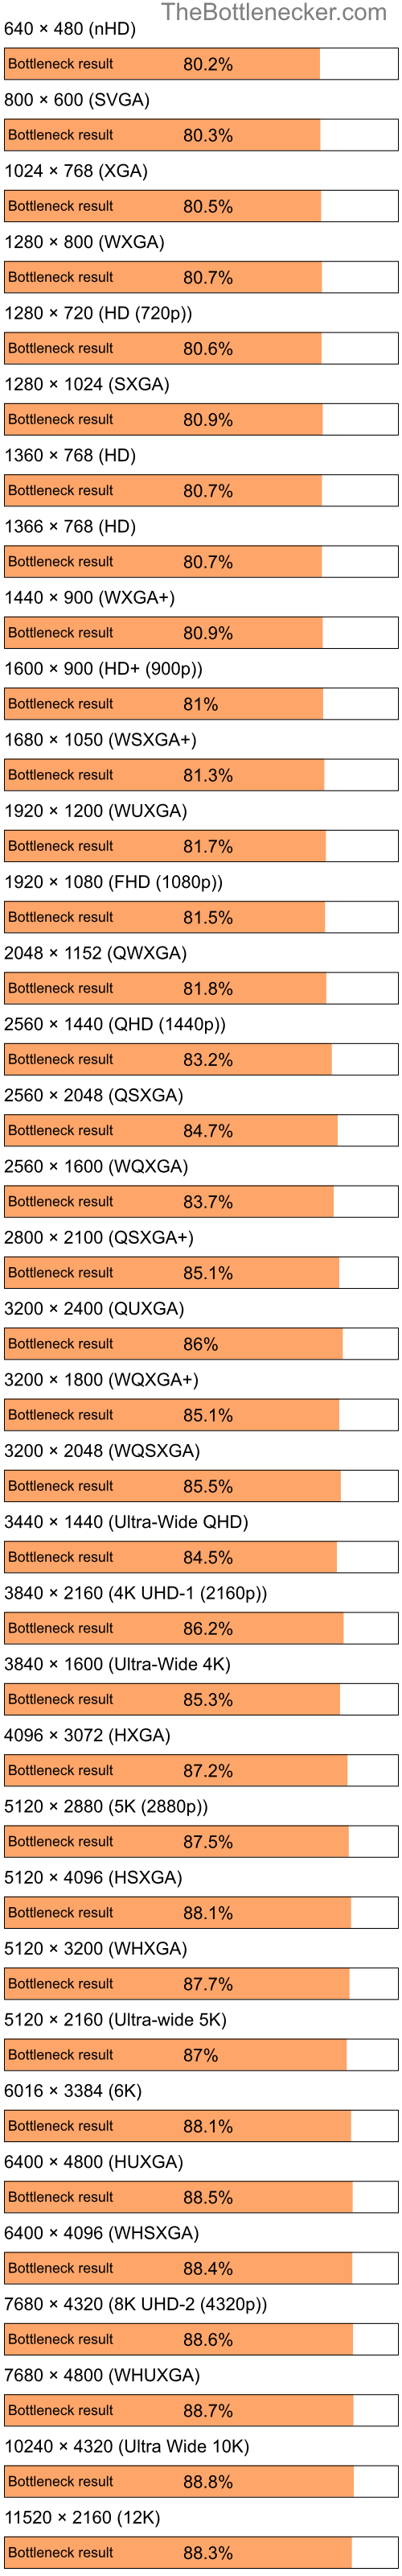 Bottleneck results by resolution for Intel Pentium 4 and NVIDIA GeForce Go 6200 in Processor Intense Tasks